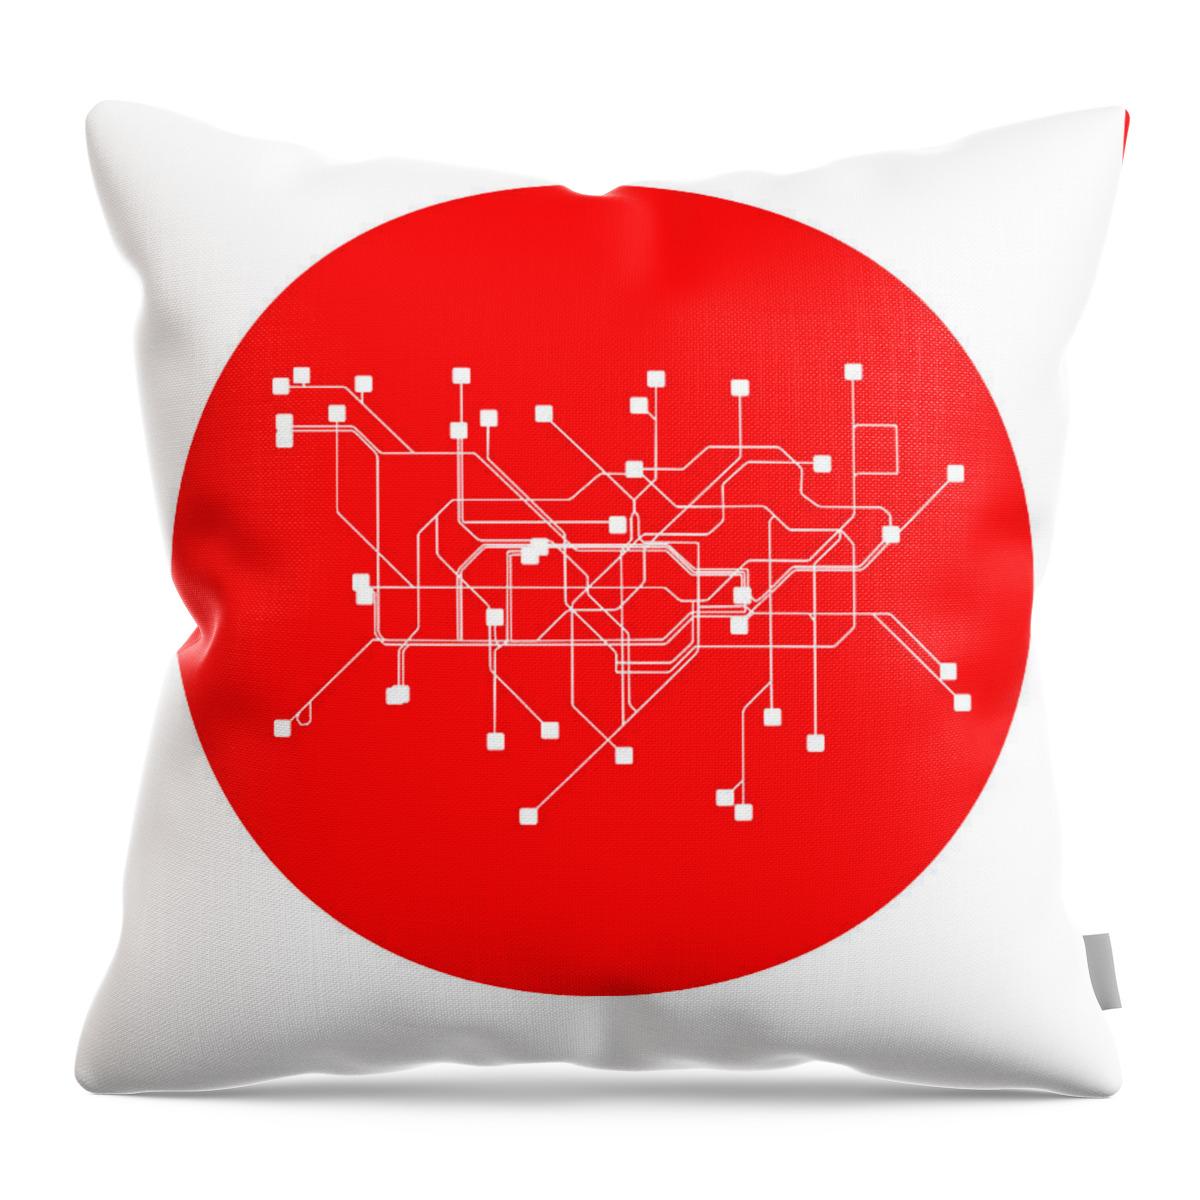 London Subway Map Throw Pillow featuring the digital art London Red Subway Map by Naxart Studio